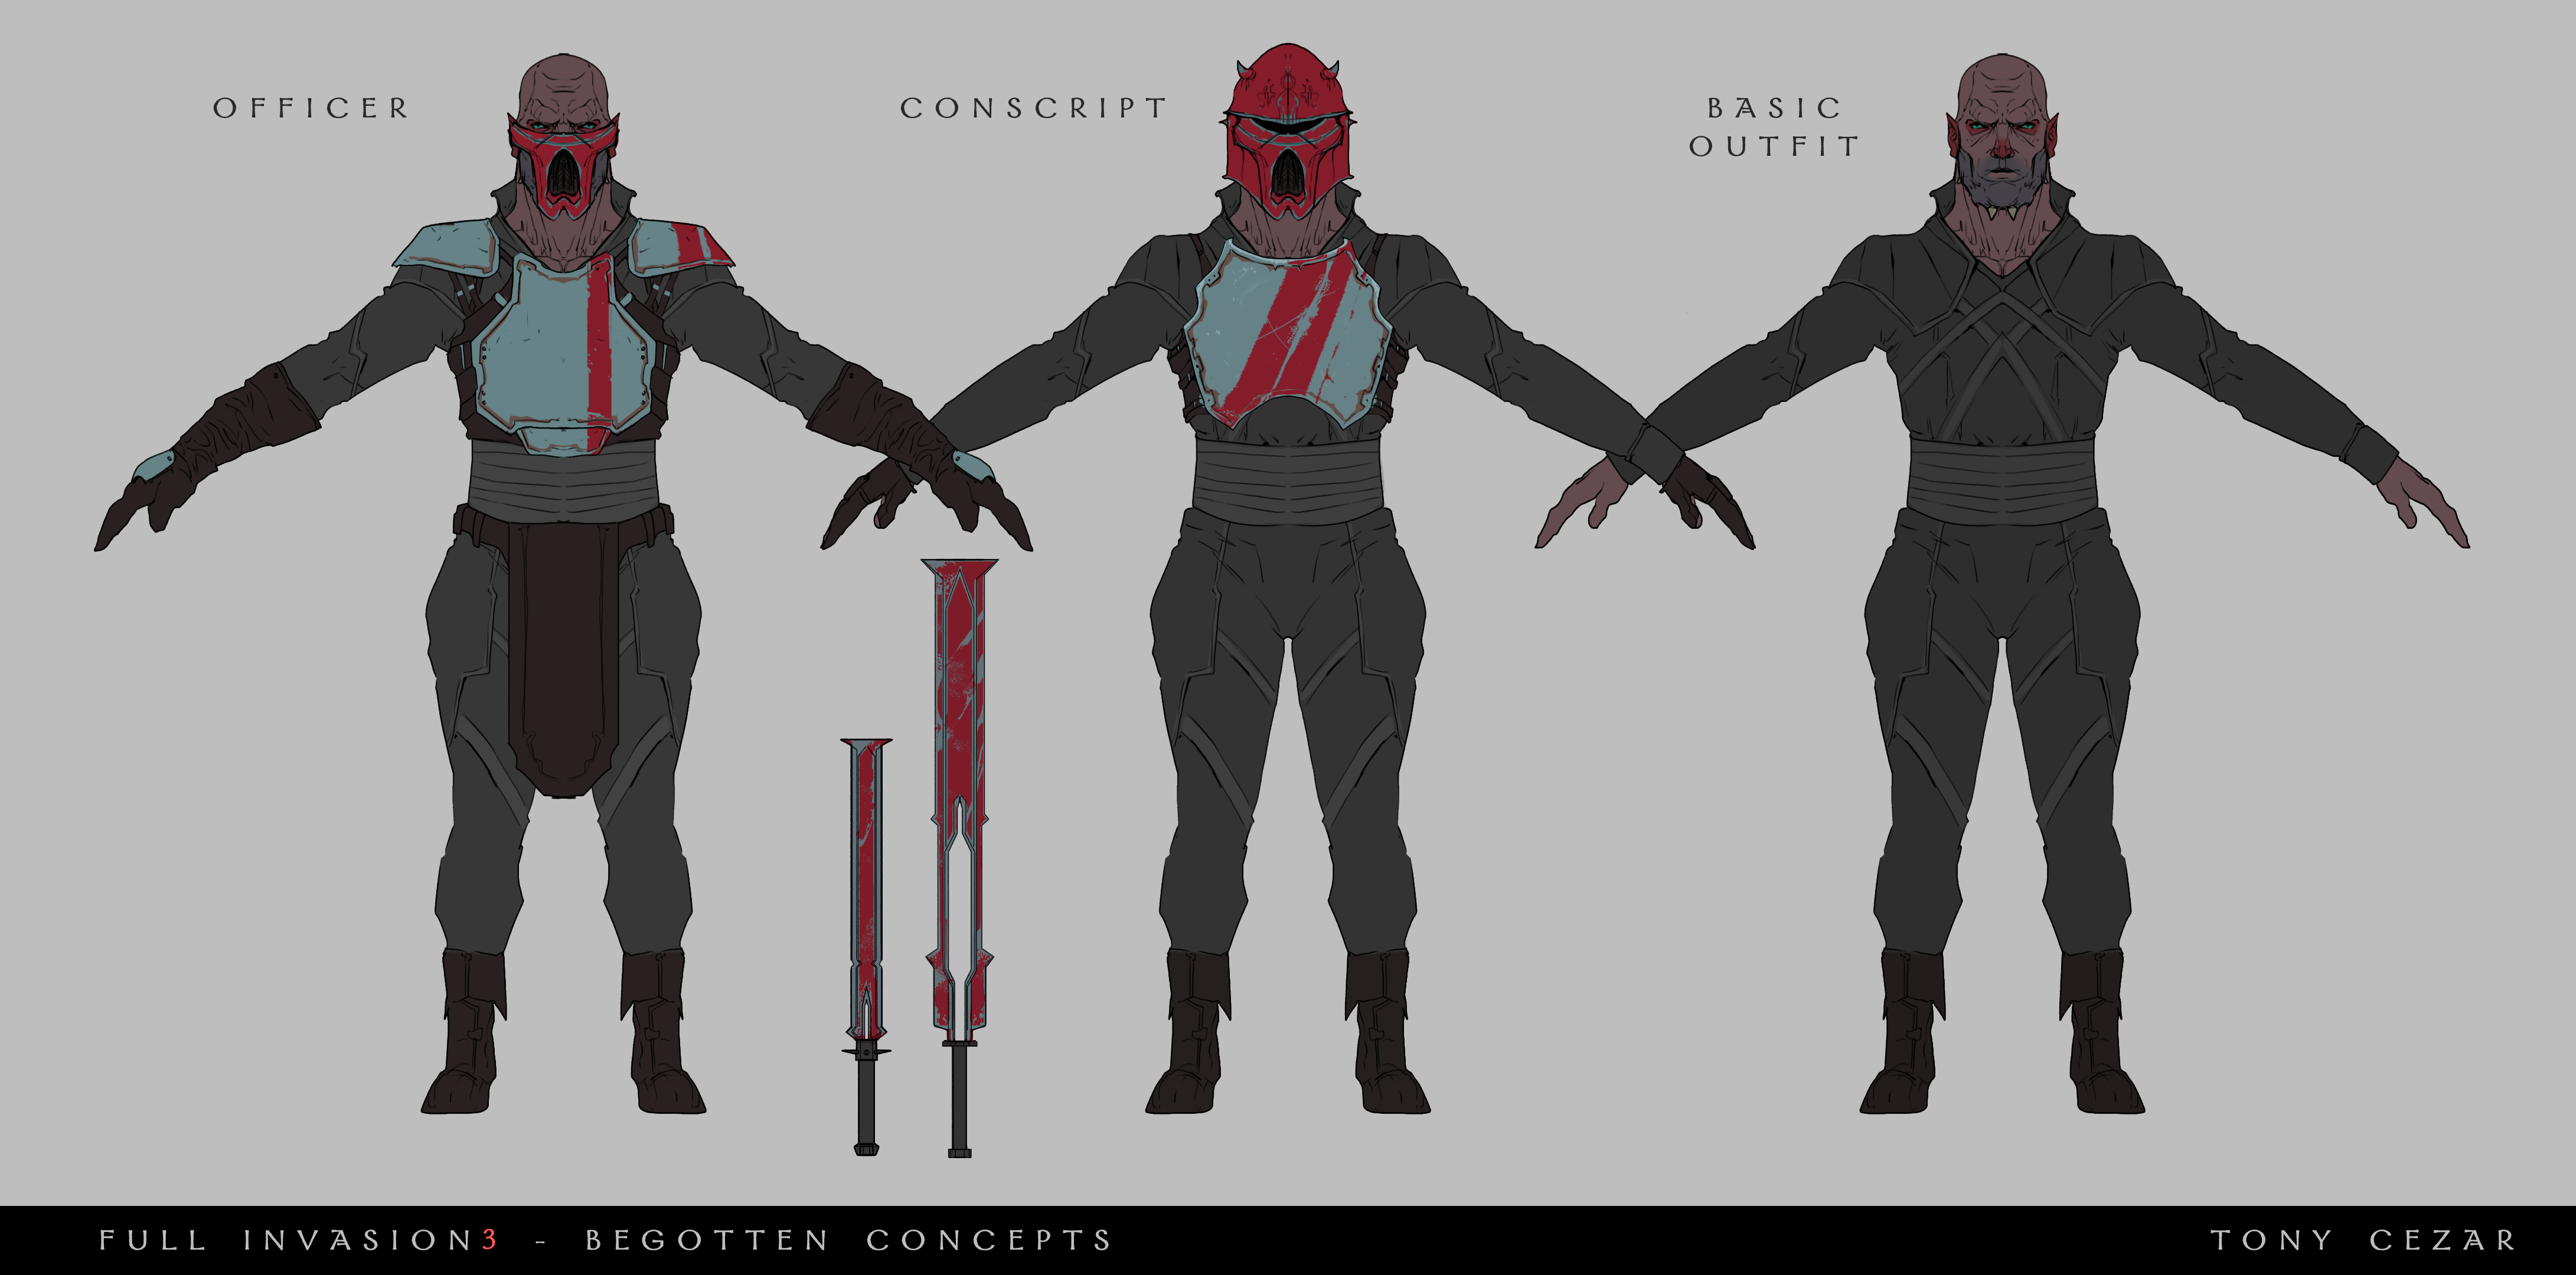 Concept art for the Begotten, a type of demon found in the Arcane Empire.